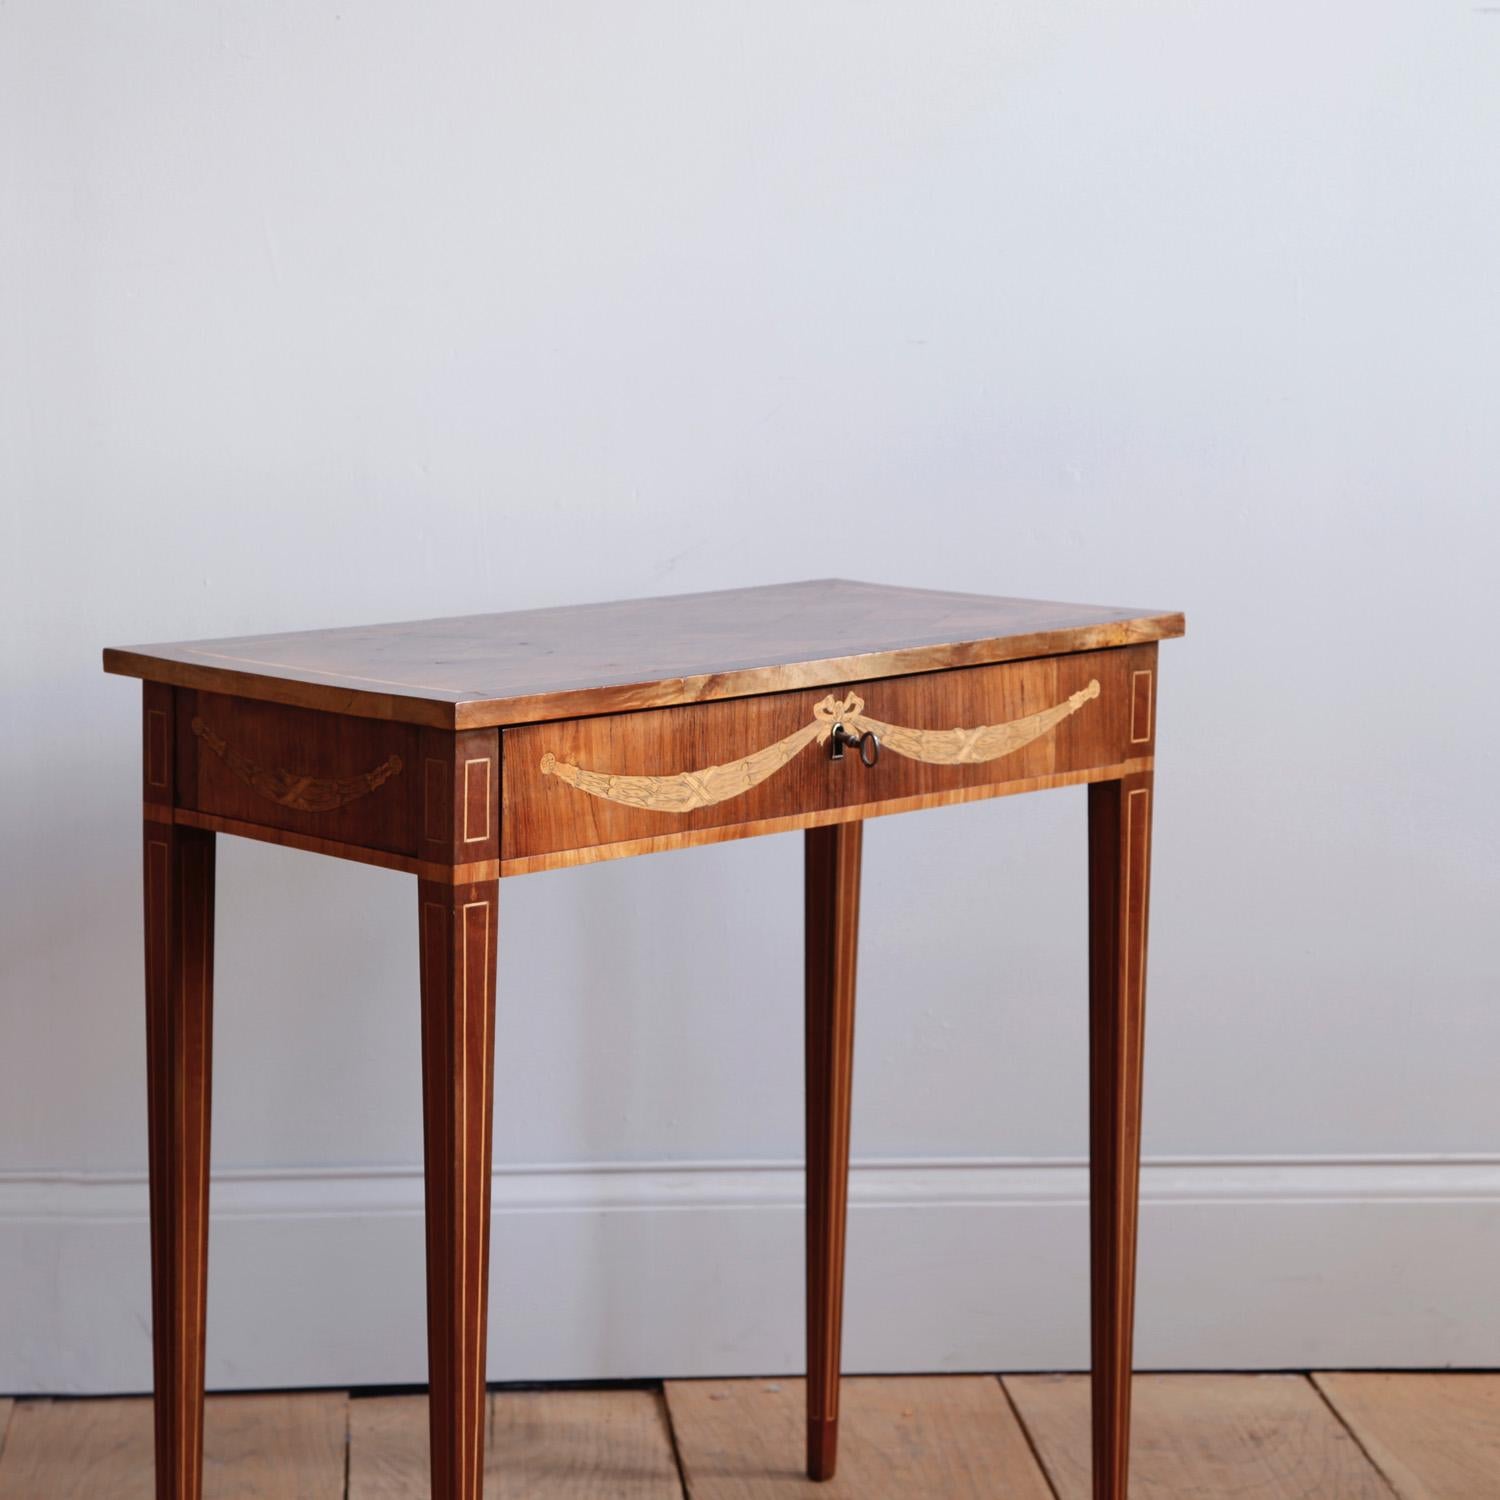 Late 18th Century Swedish Gustavian Occasional Table with Fruitwood Inlay For Sale 2